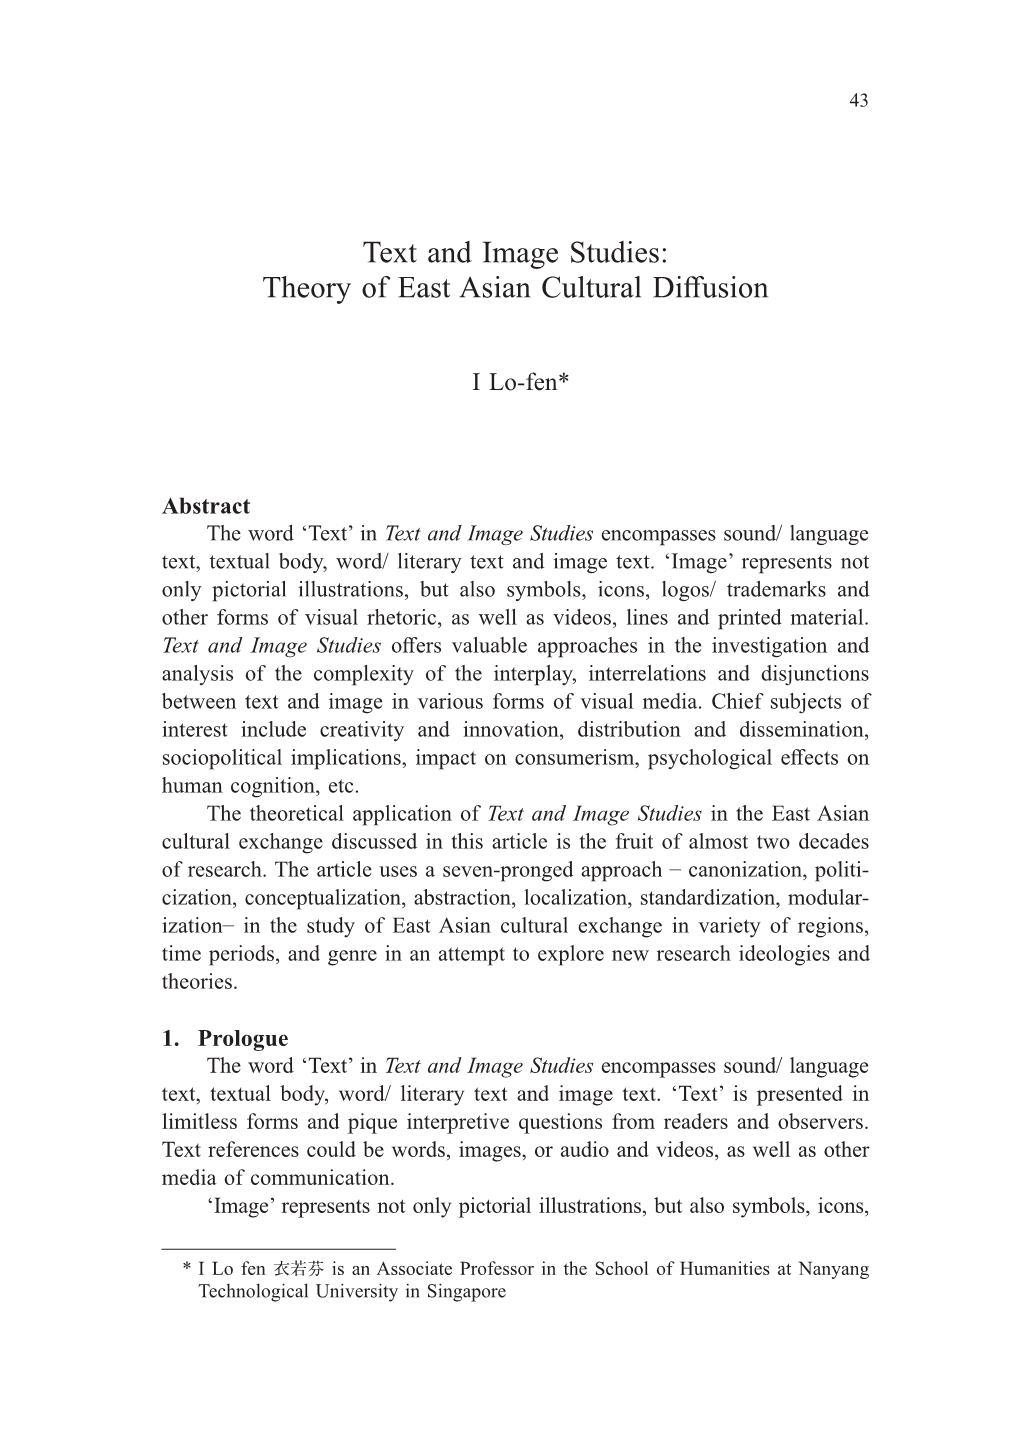 Text and Image Studies: Theory of East Asian Cultural Diffusion